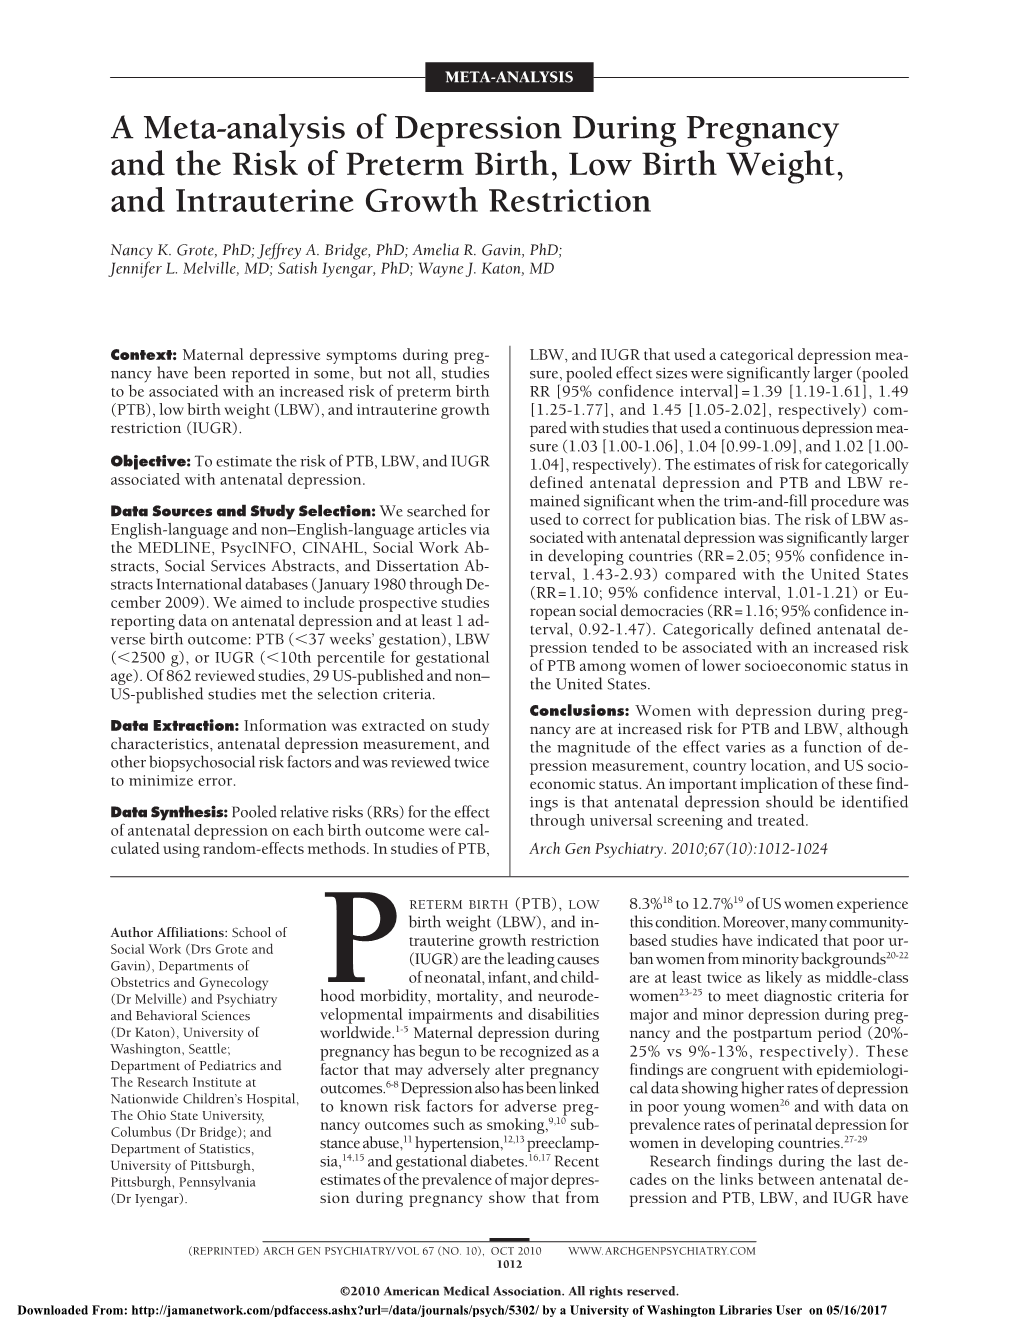 A Meta-Analysis of Depression During Pregnancy and the Risk of Preterm Birth, Low Birth Weight, and Intrauterine Growth Restriction